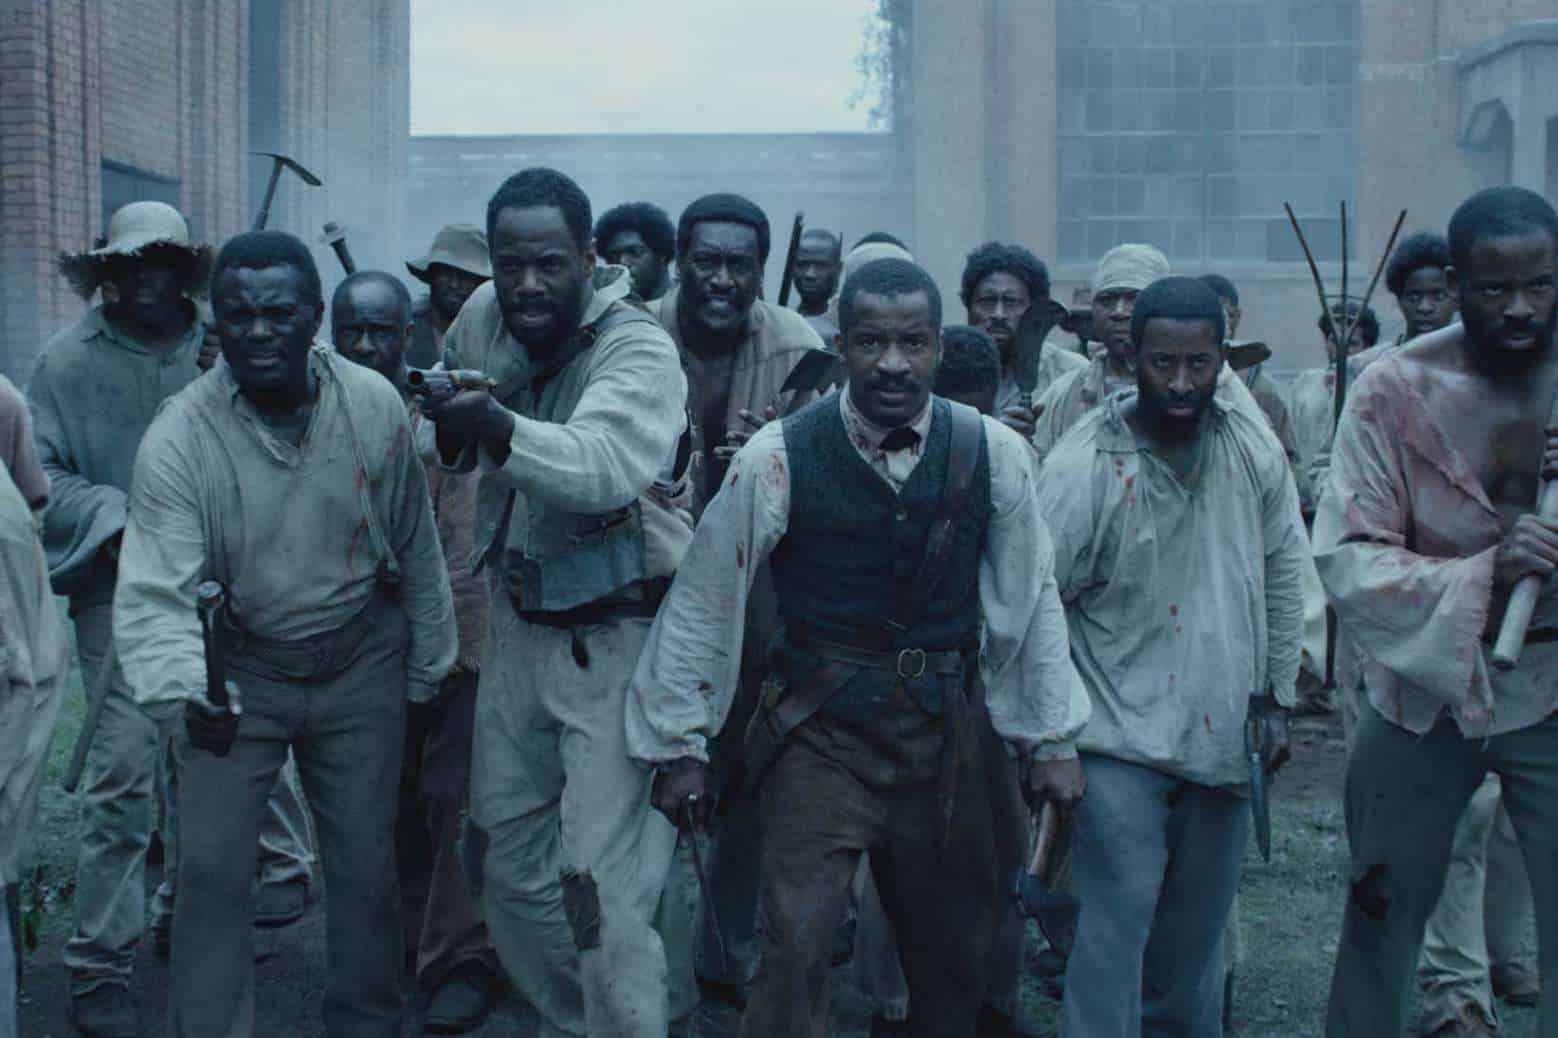 Best Movies About Slavery